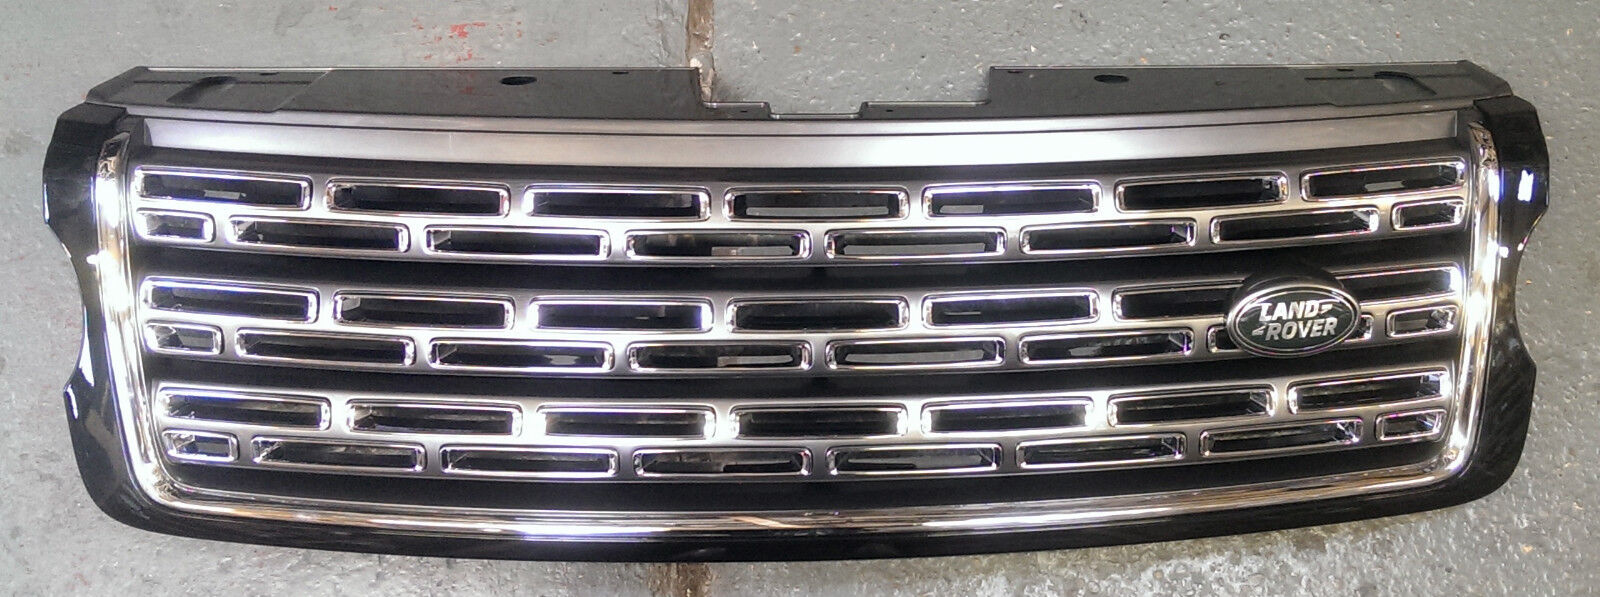 Land Rover OEM L405 Range Rover 2013+ Autobiography Black LWB Special Grille NEW